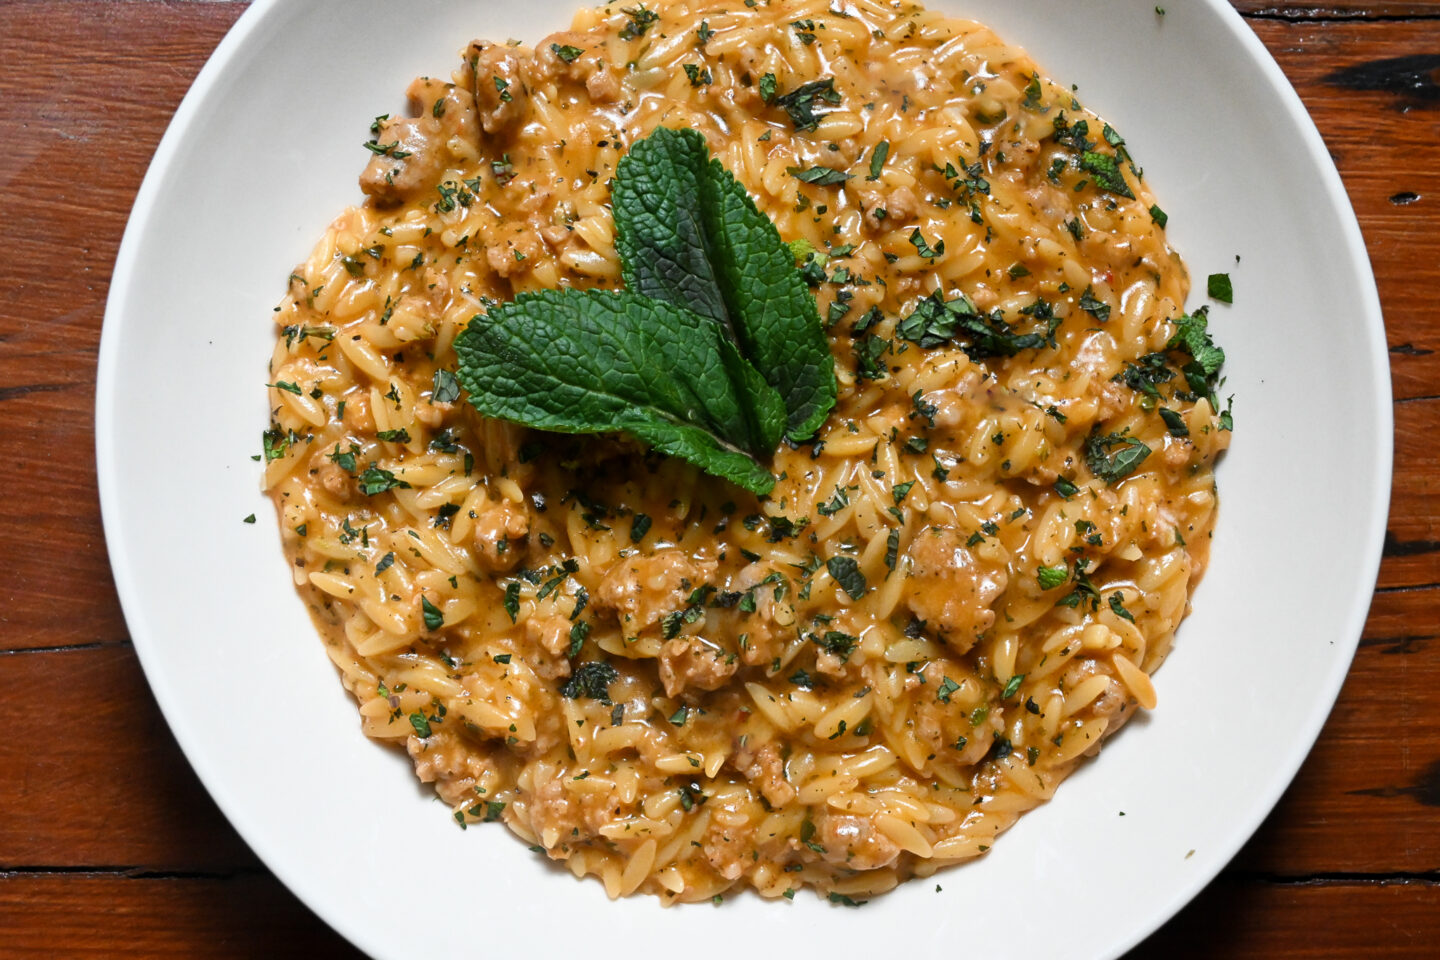 Bowl of Sausage, Lemon & Mint Orzo garnished with fresh mint leaves.